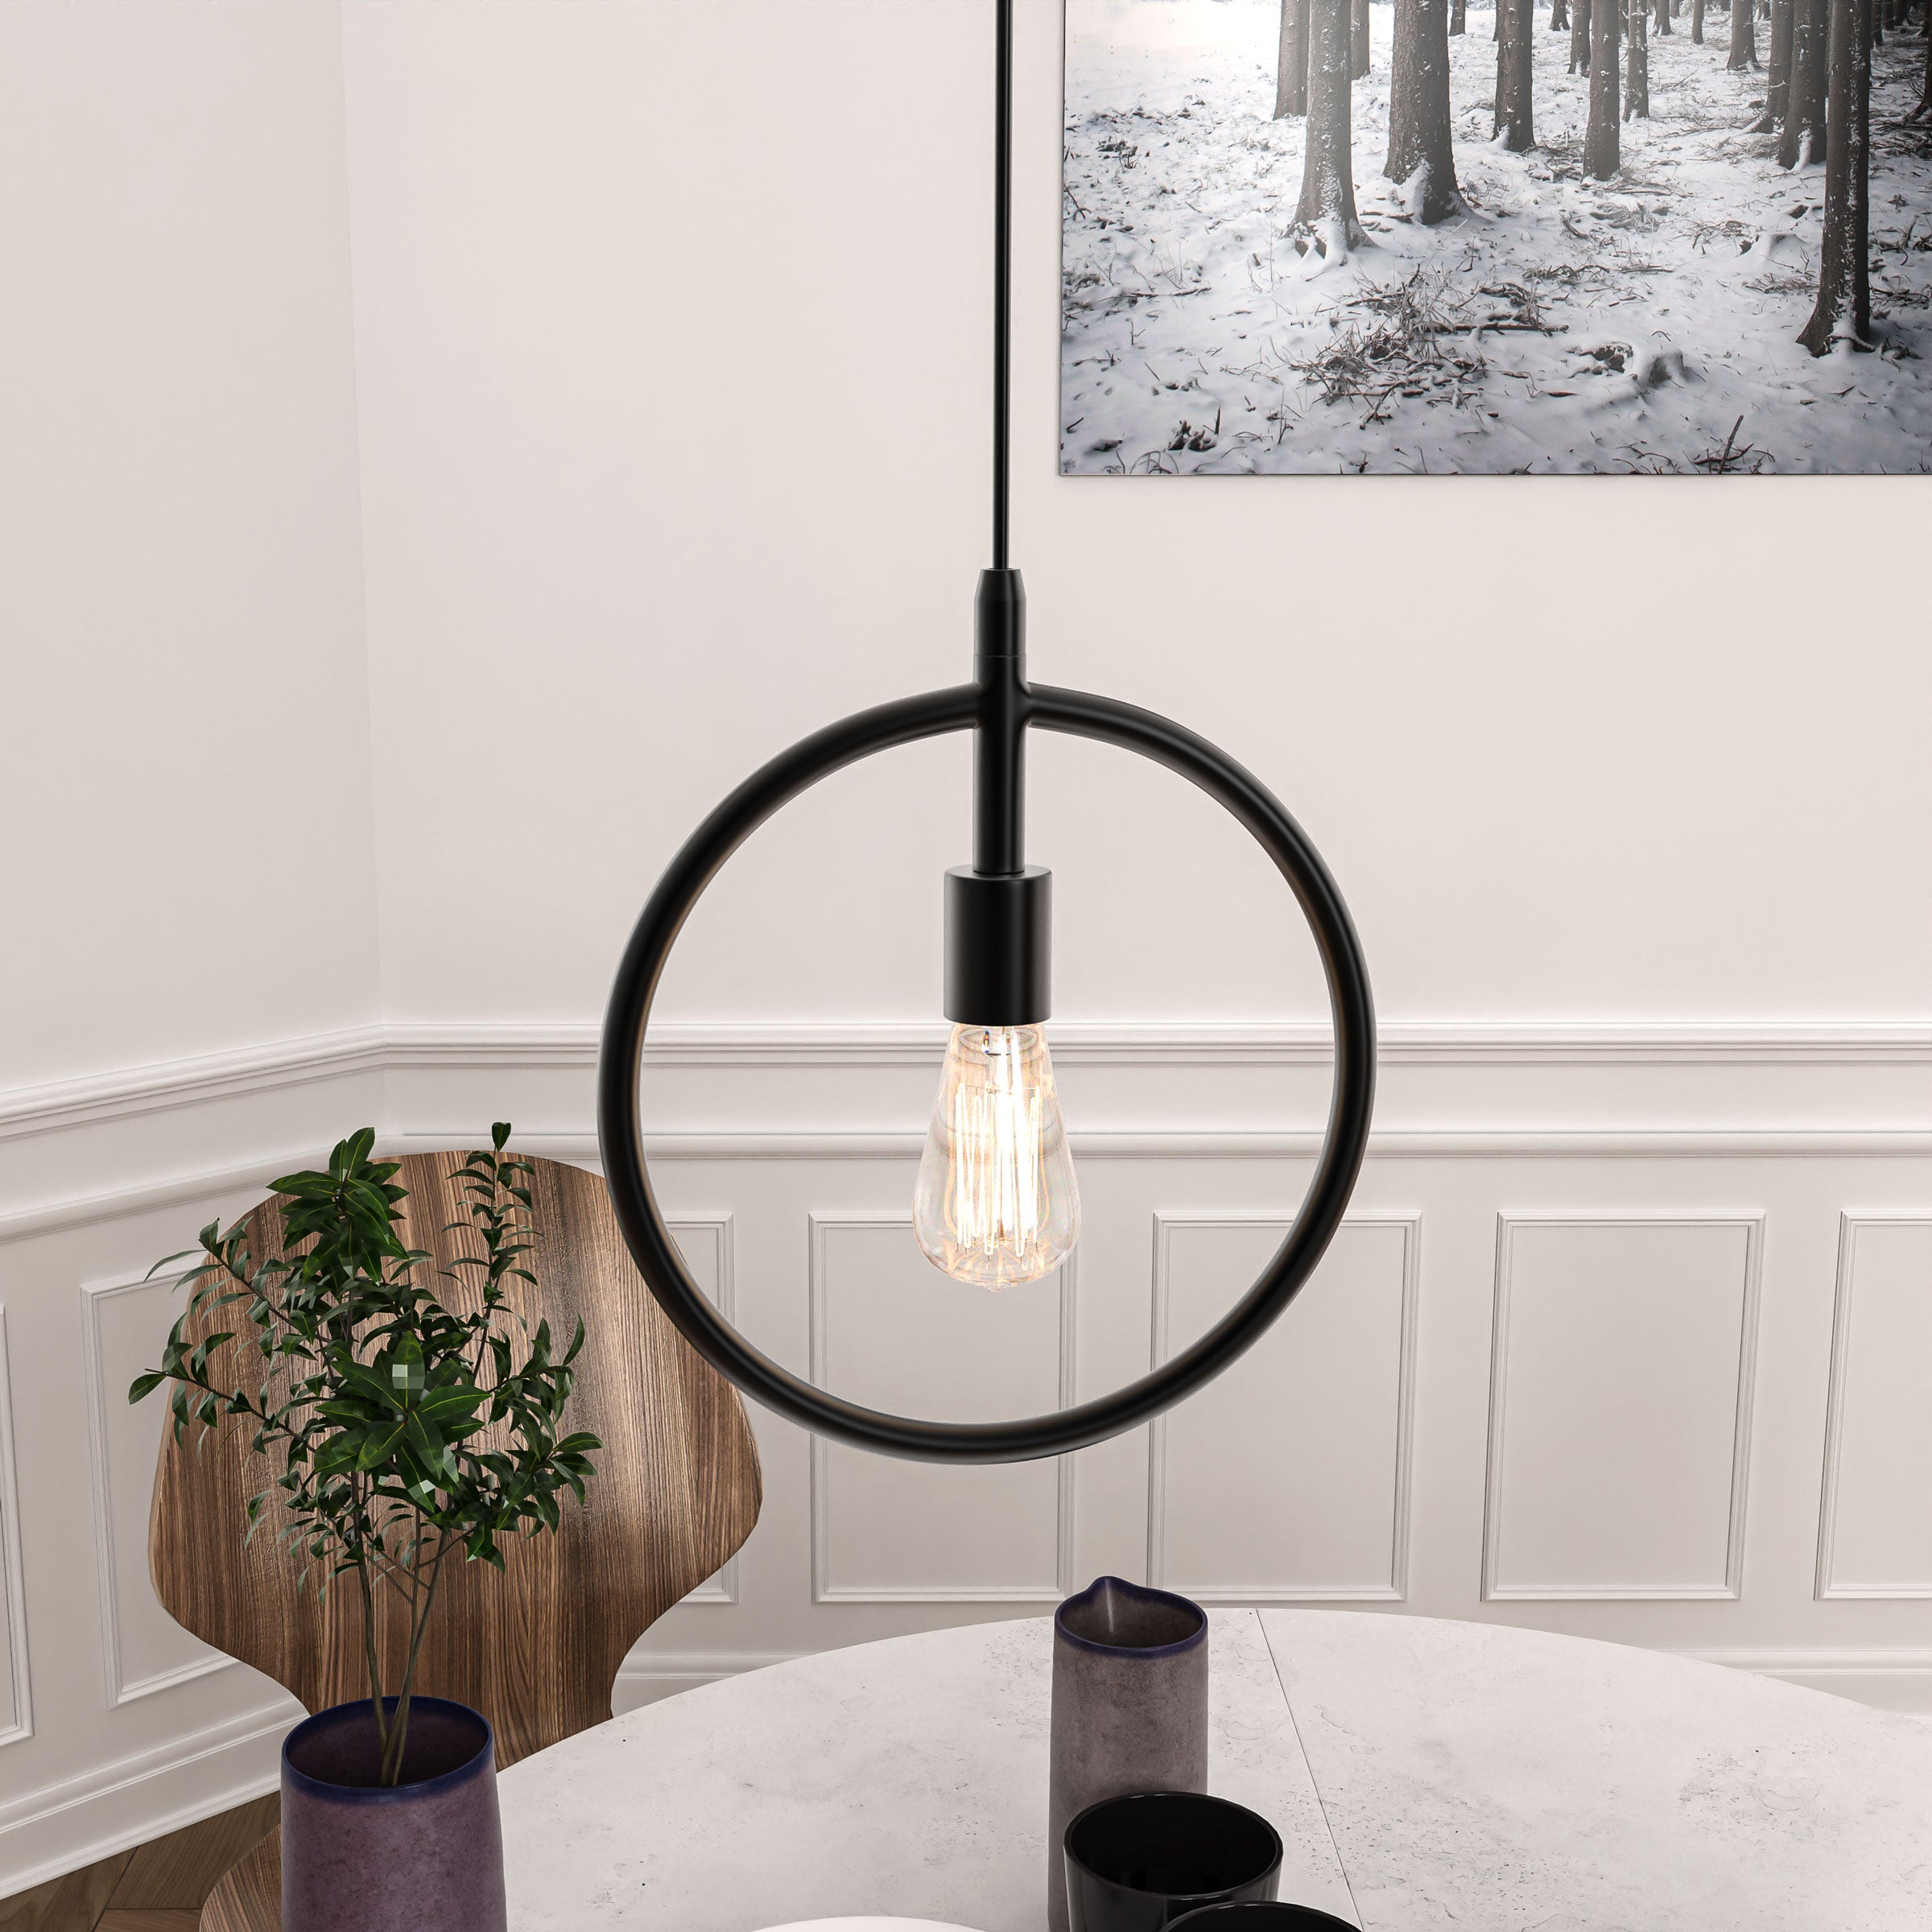 Matte Black Ring Shape Pendant Light Fixture, E26 Base, UL Listed for Dry Location, Fixture Size: D12 x H13.5 Inch